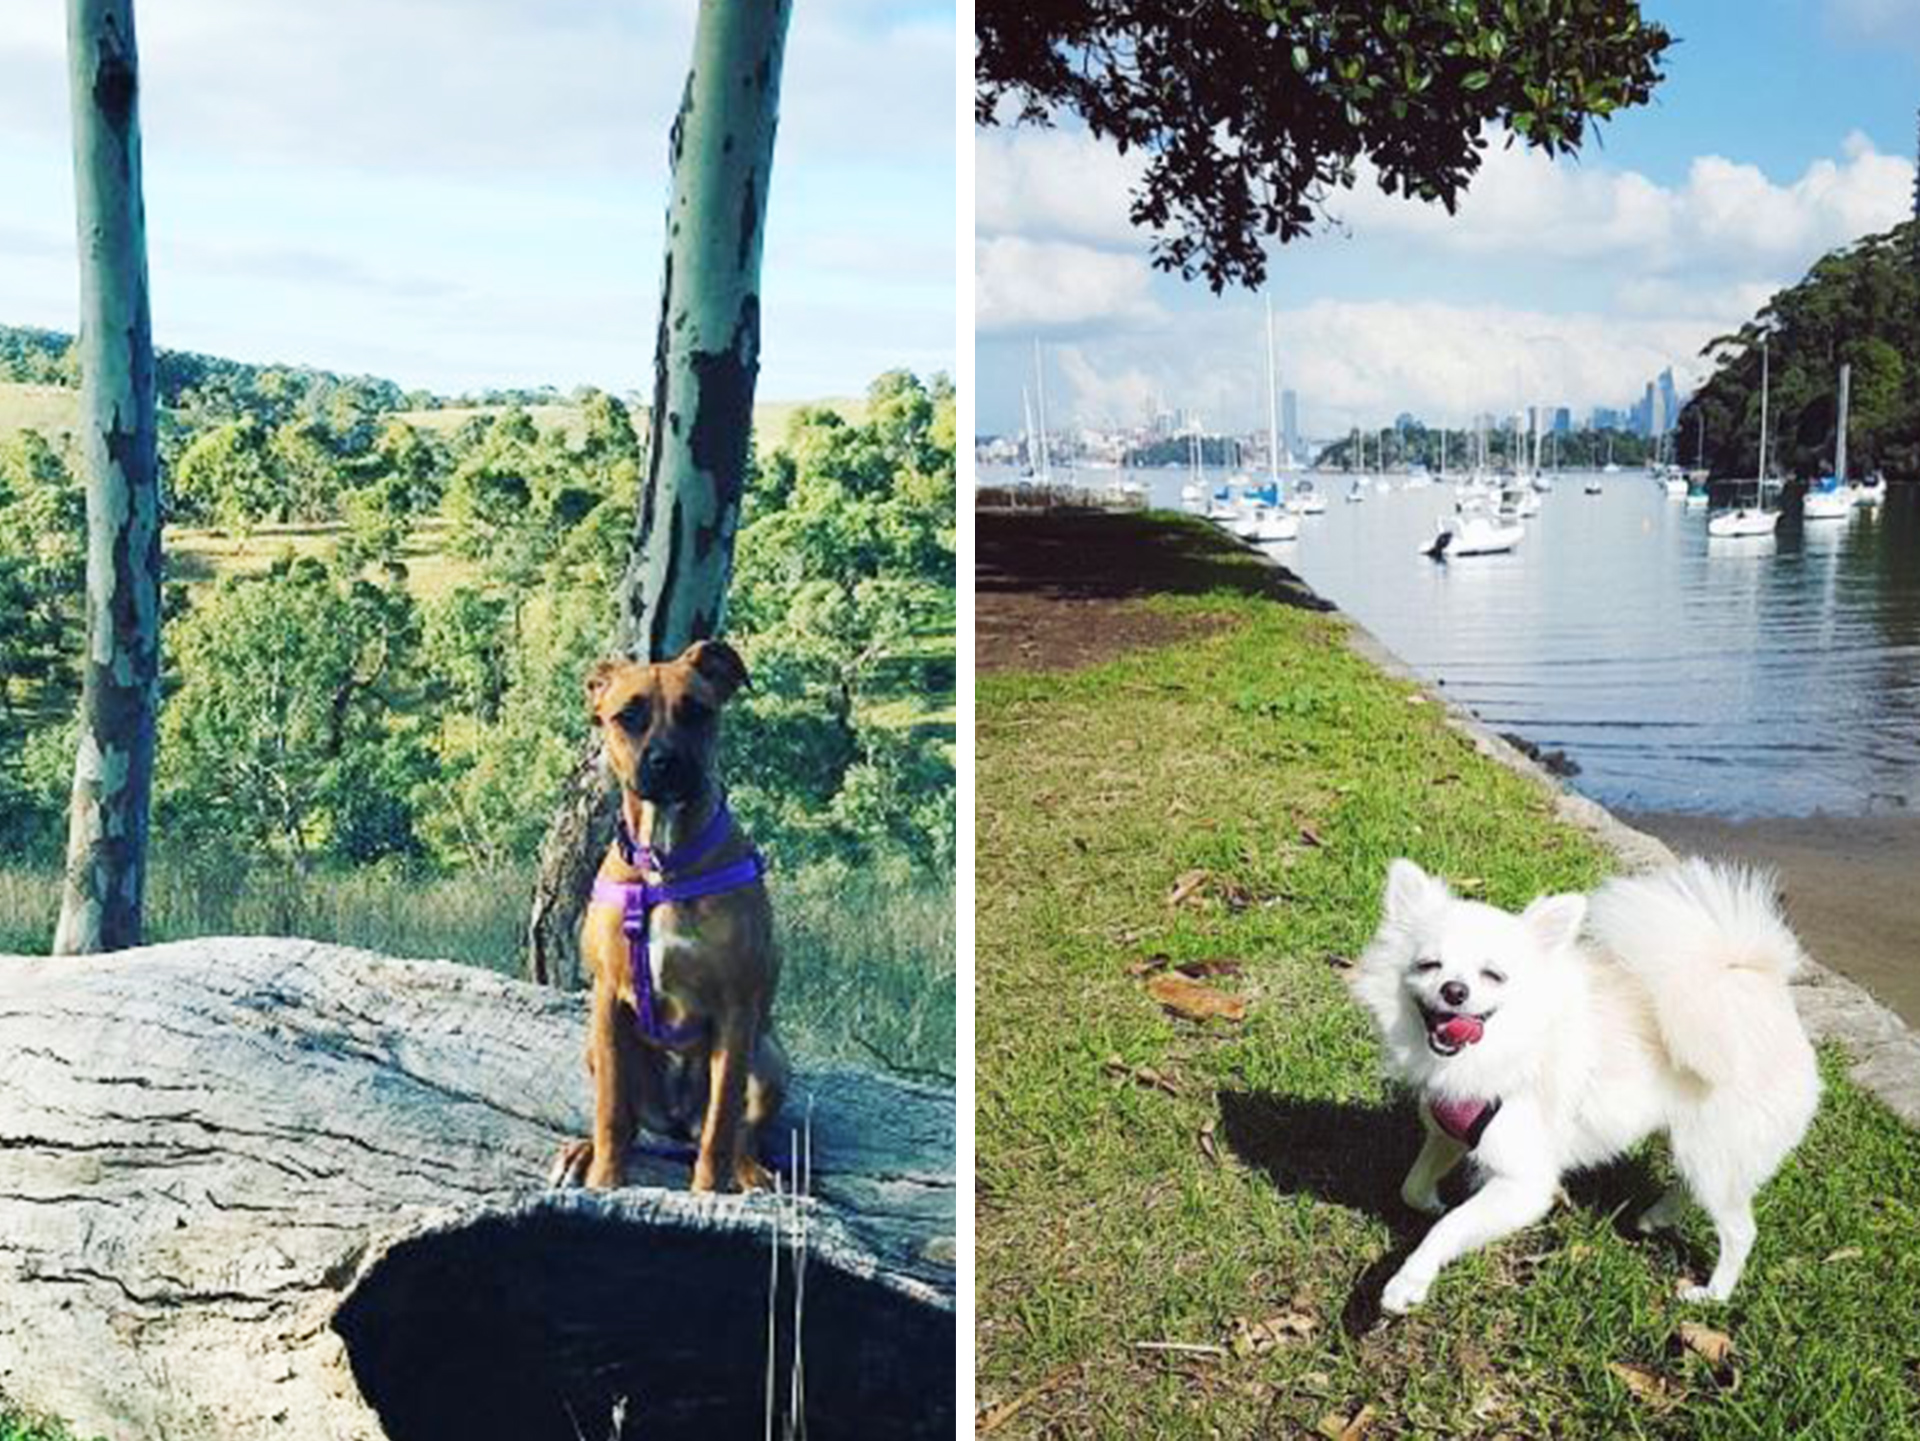 Dog-friendly dog parks and beaches